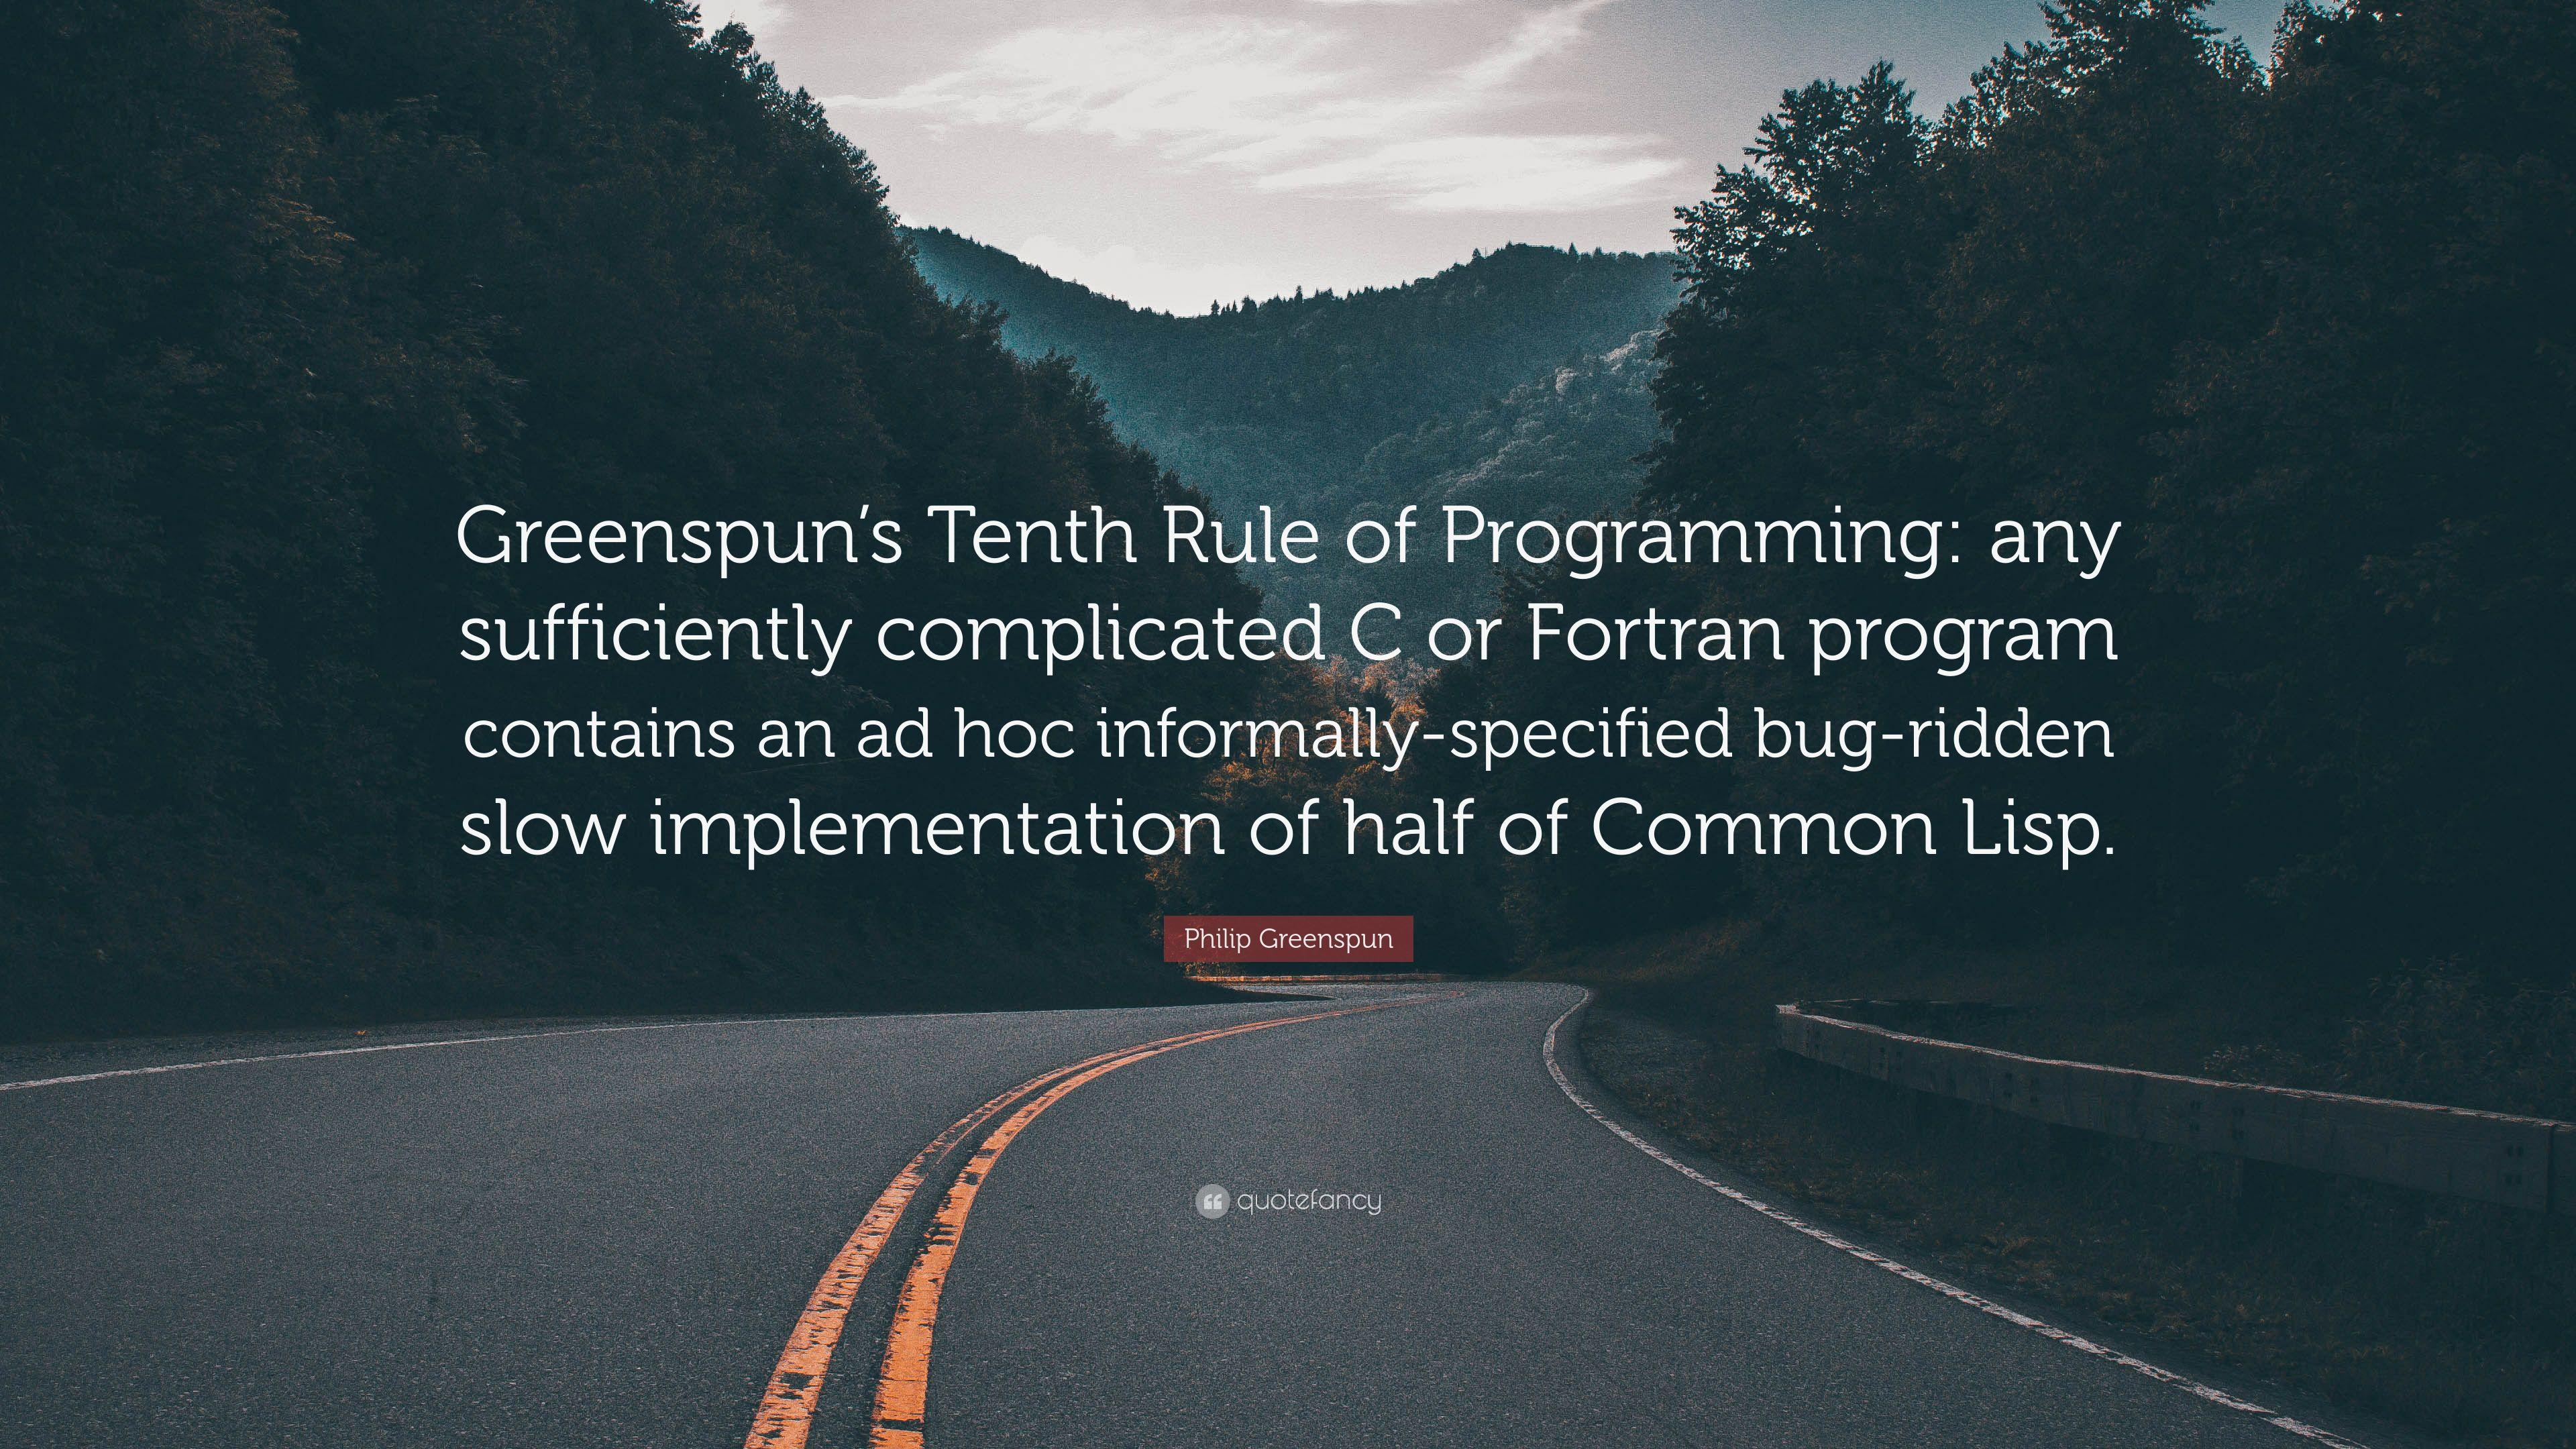 Philip Greenspun Quote: “Greenspun's Tenth Rule of Programming: any